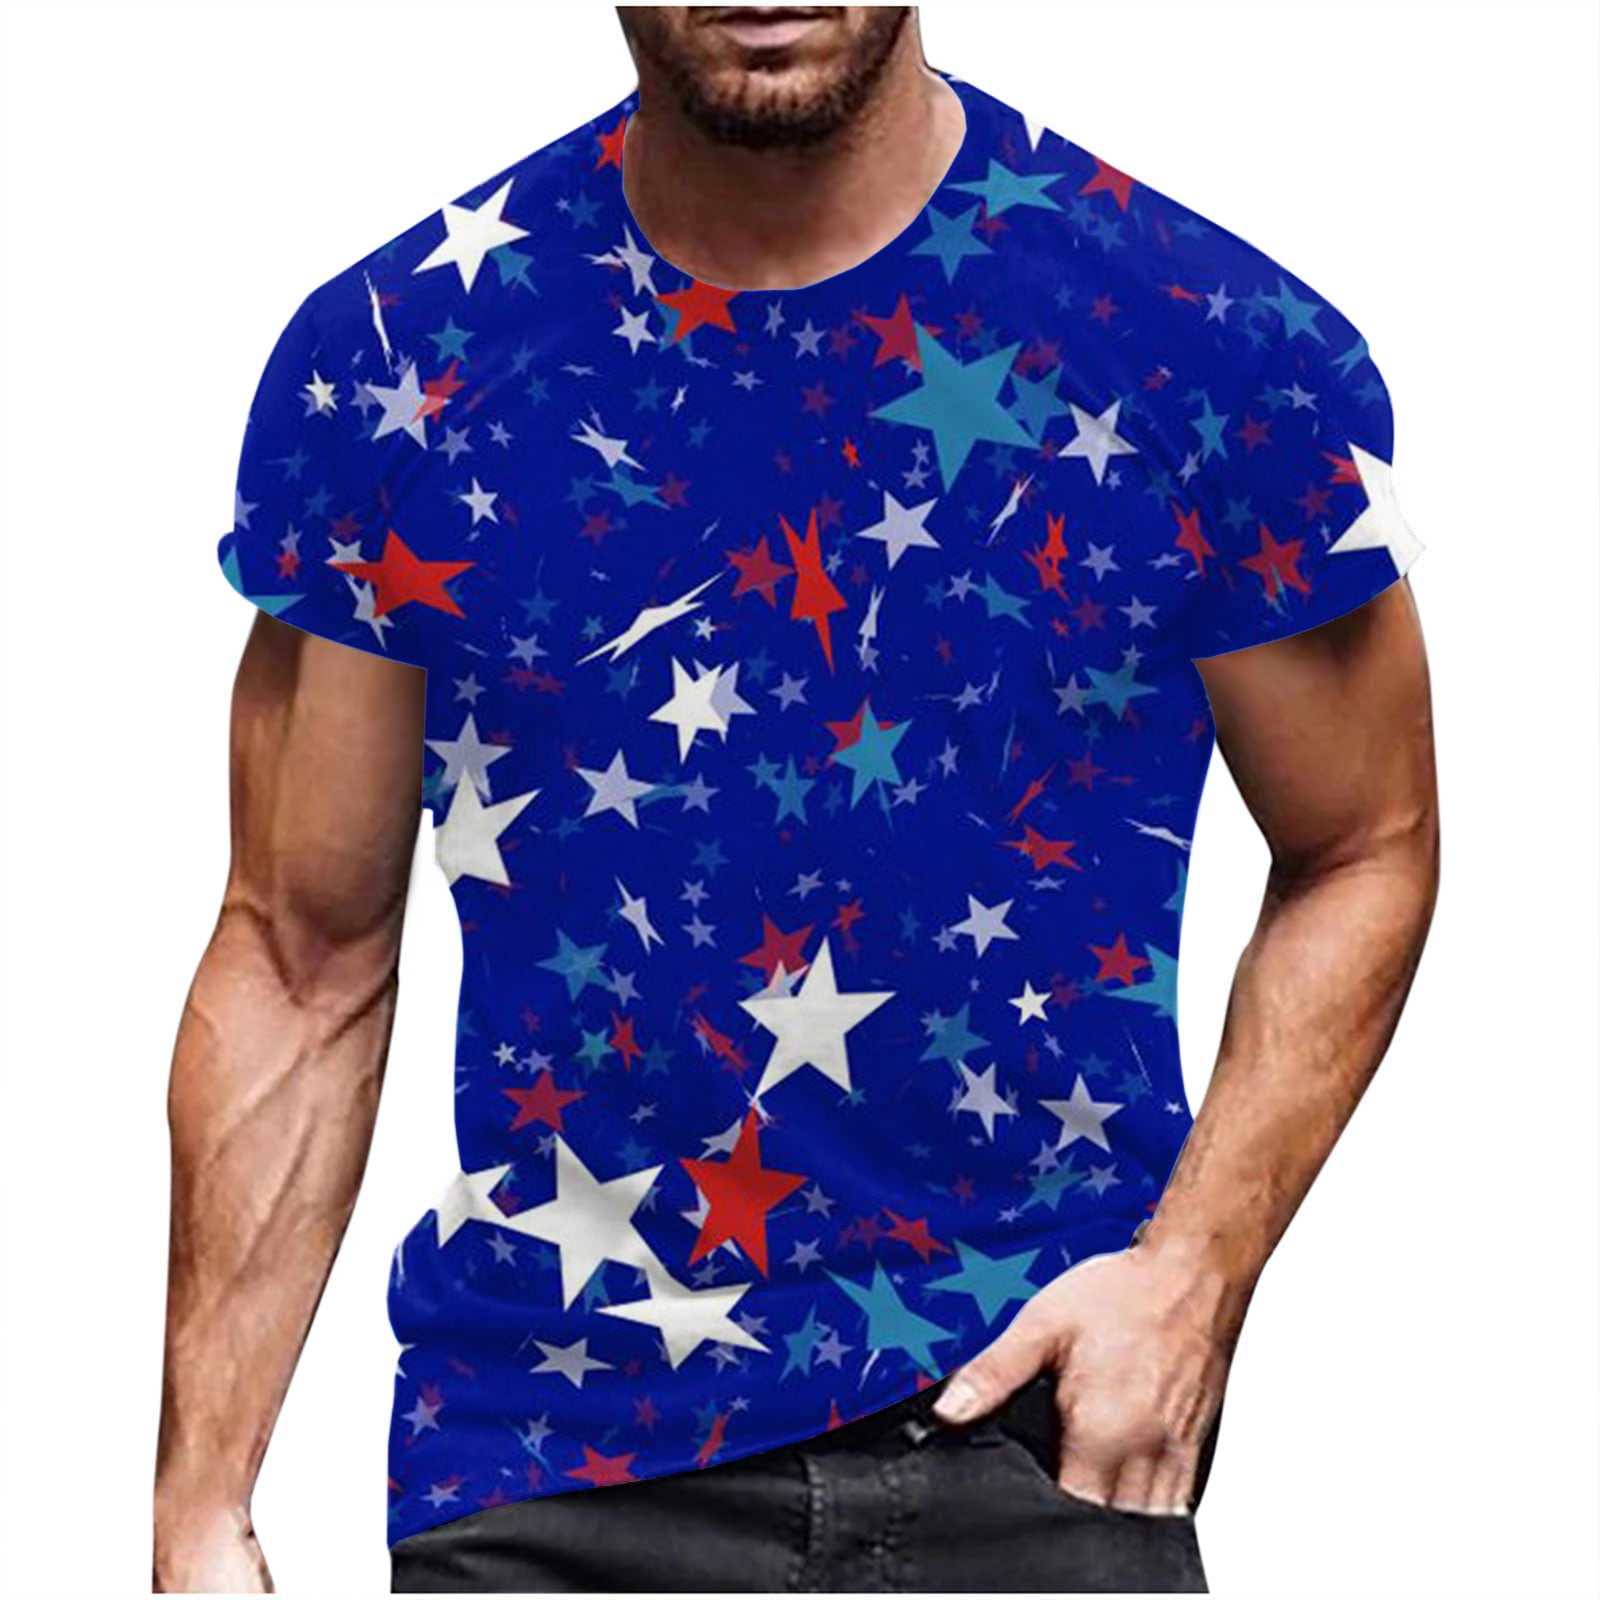 ZCFZJW July 4th Independence Day Patriotic Shirts for Men Casual Summer ...